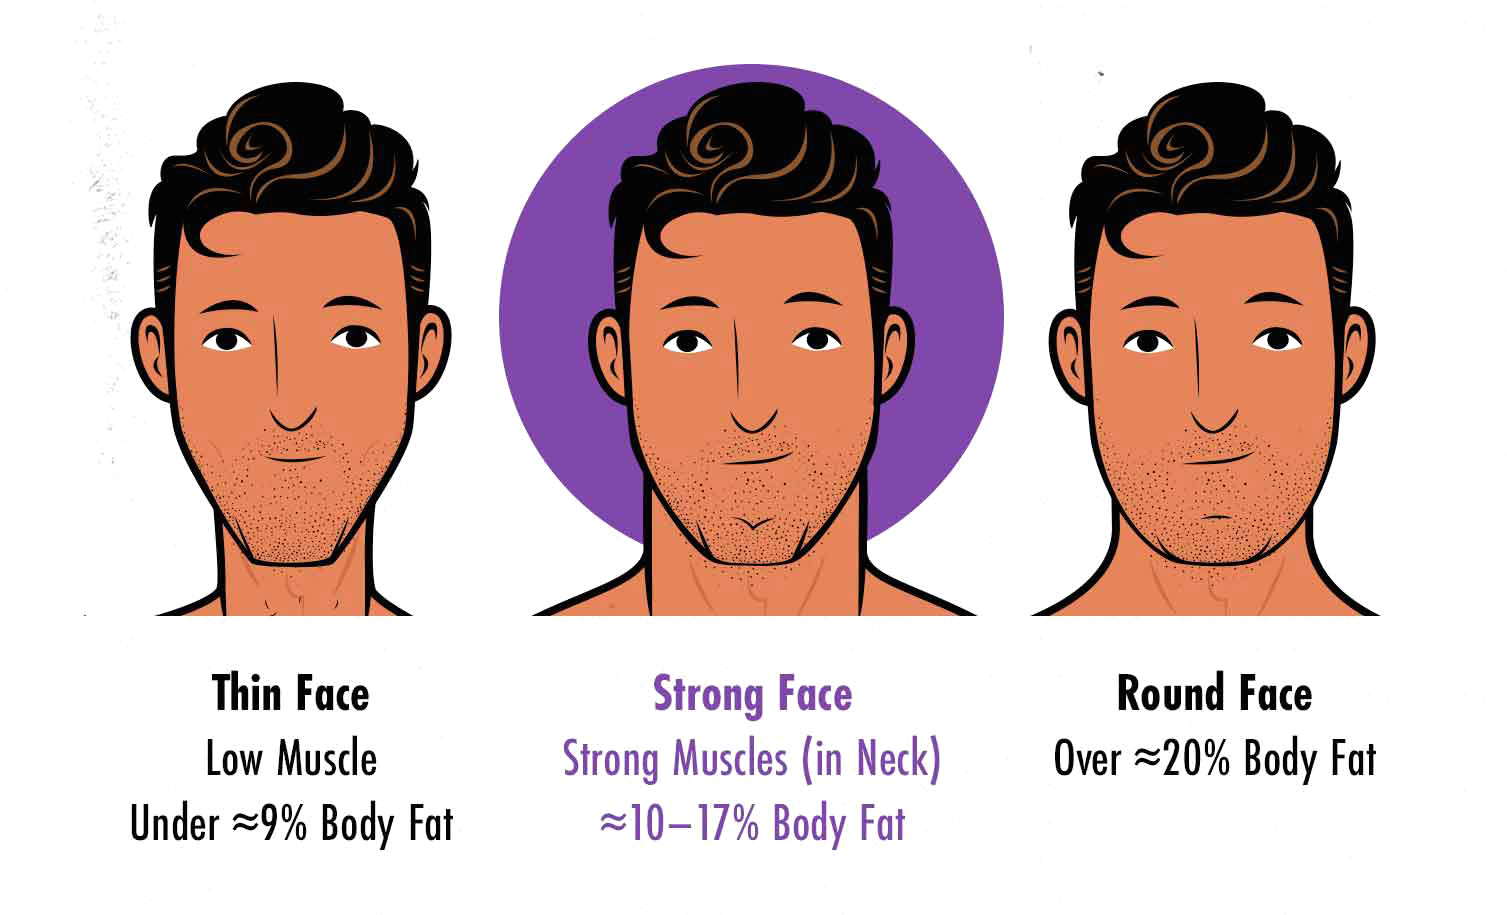 How Fat and Muscle Changes the Appearance of Your Face